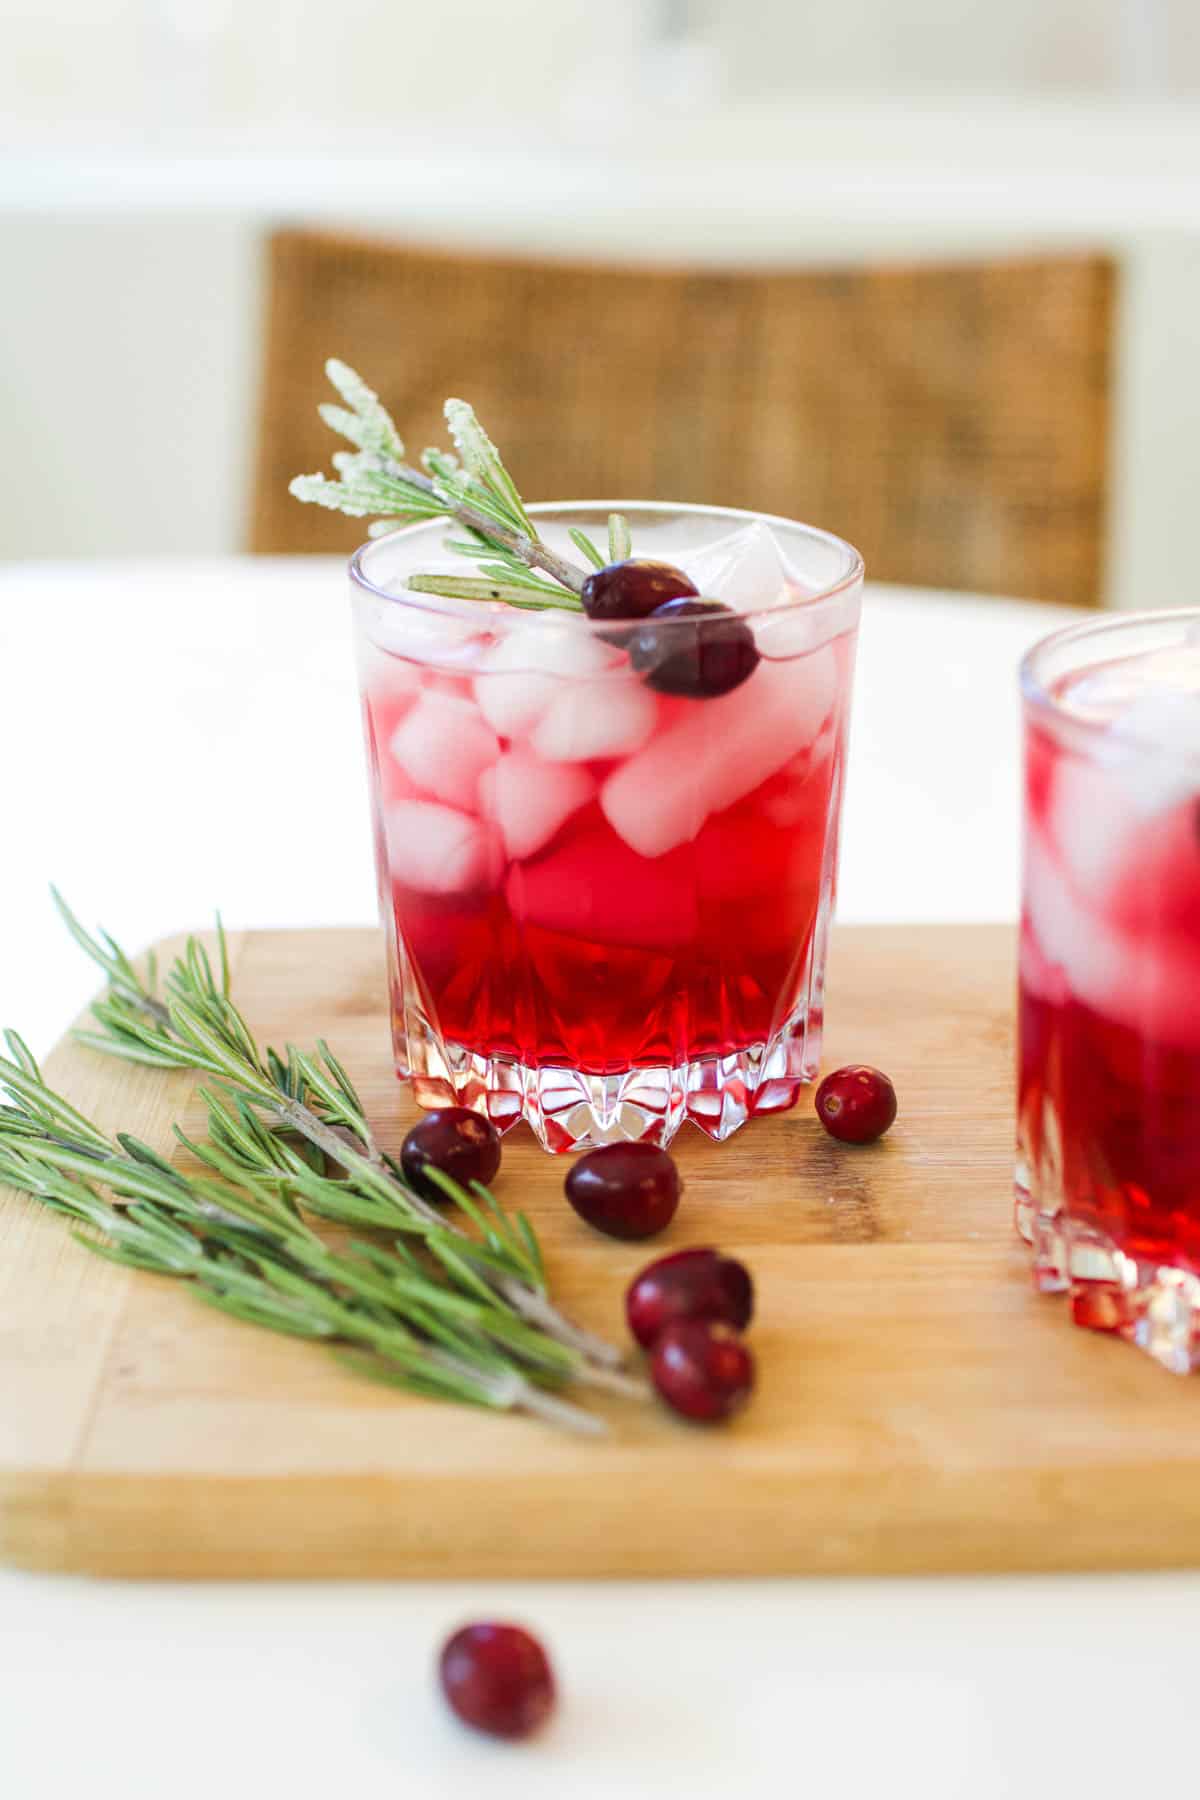 Vodka and Cranberry in a cocktail glass with rosemary garnish.